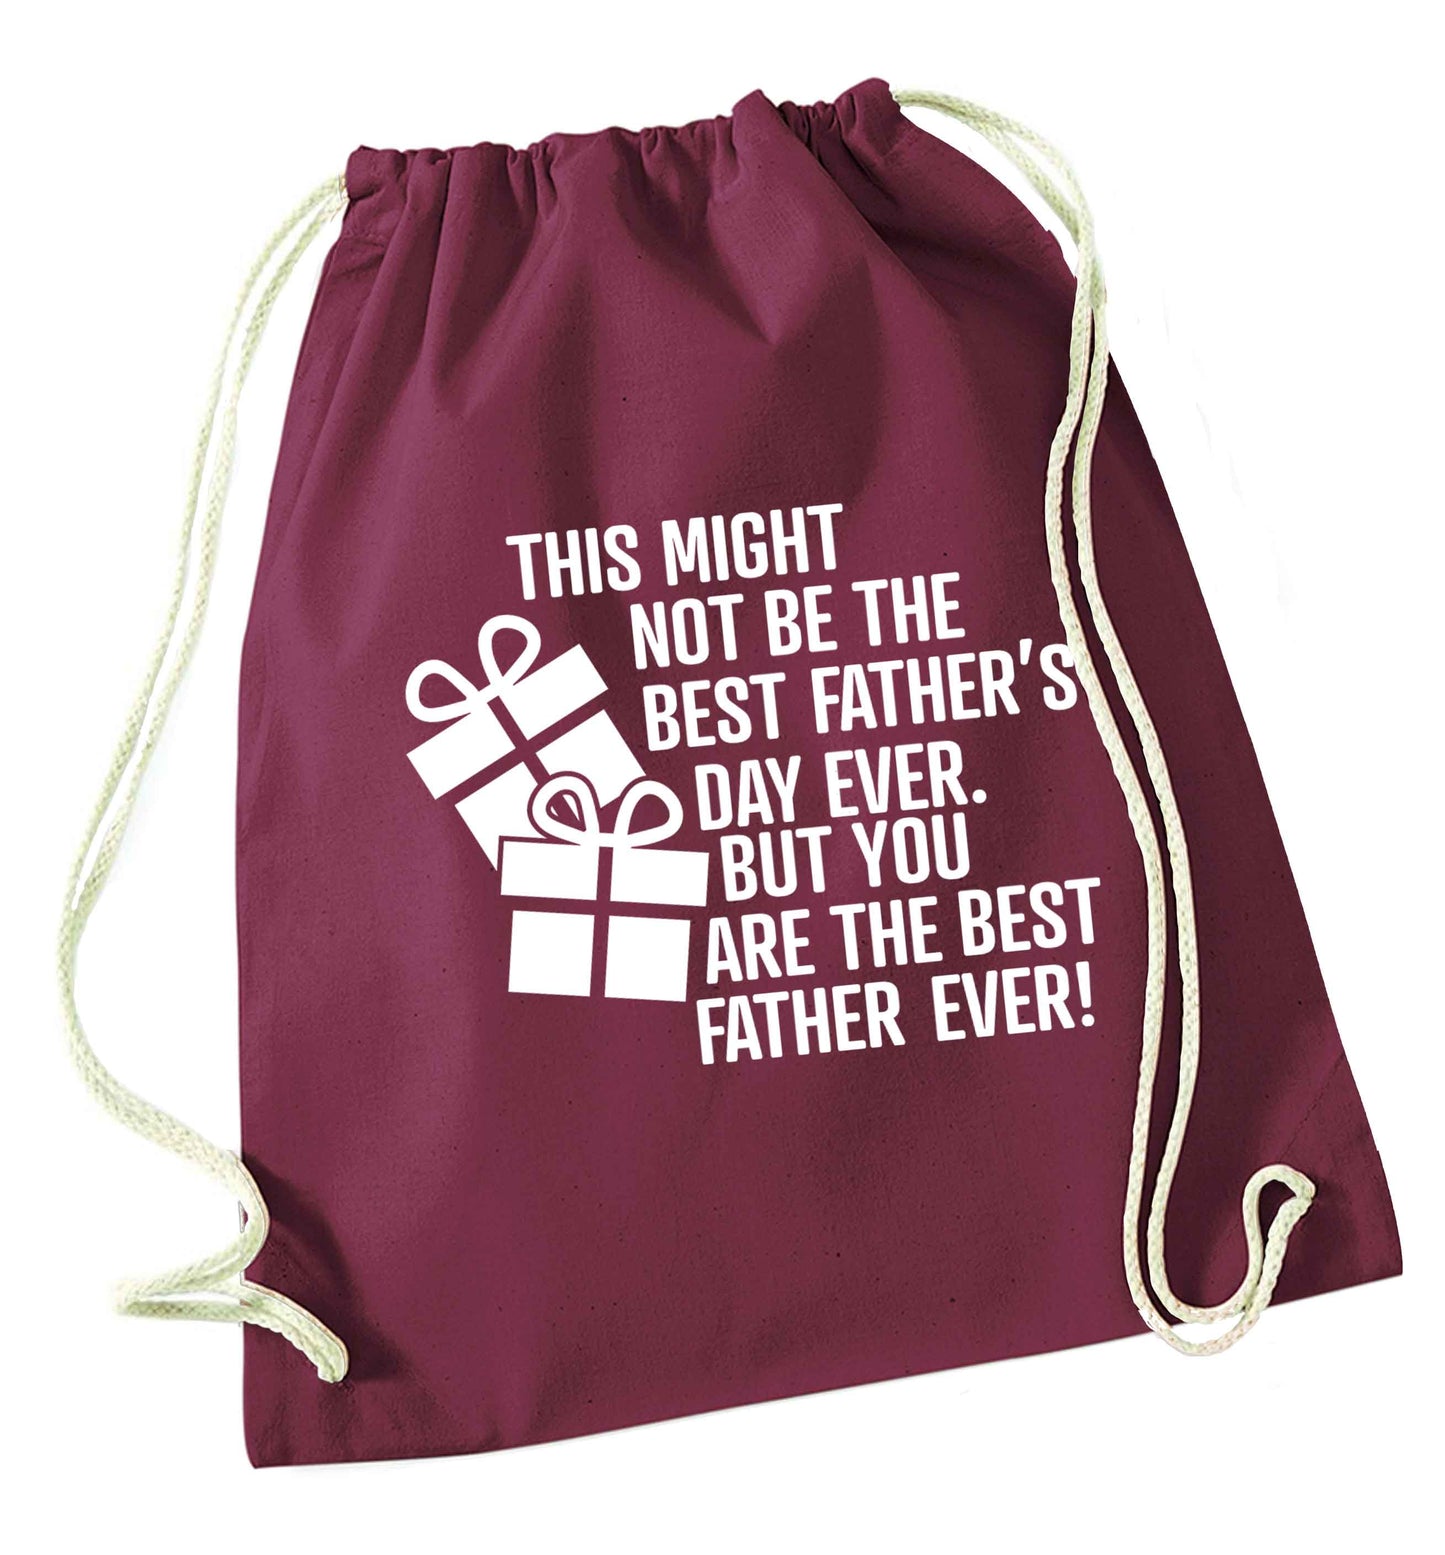 It might not be the best Father's Day ever but you are the best father ever! maroon drawstring bag